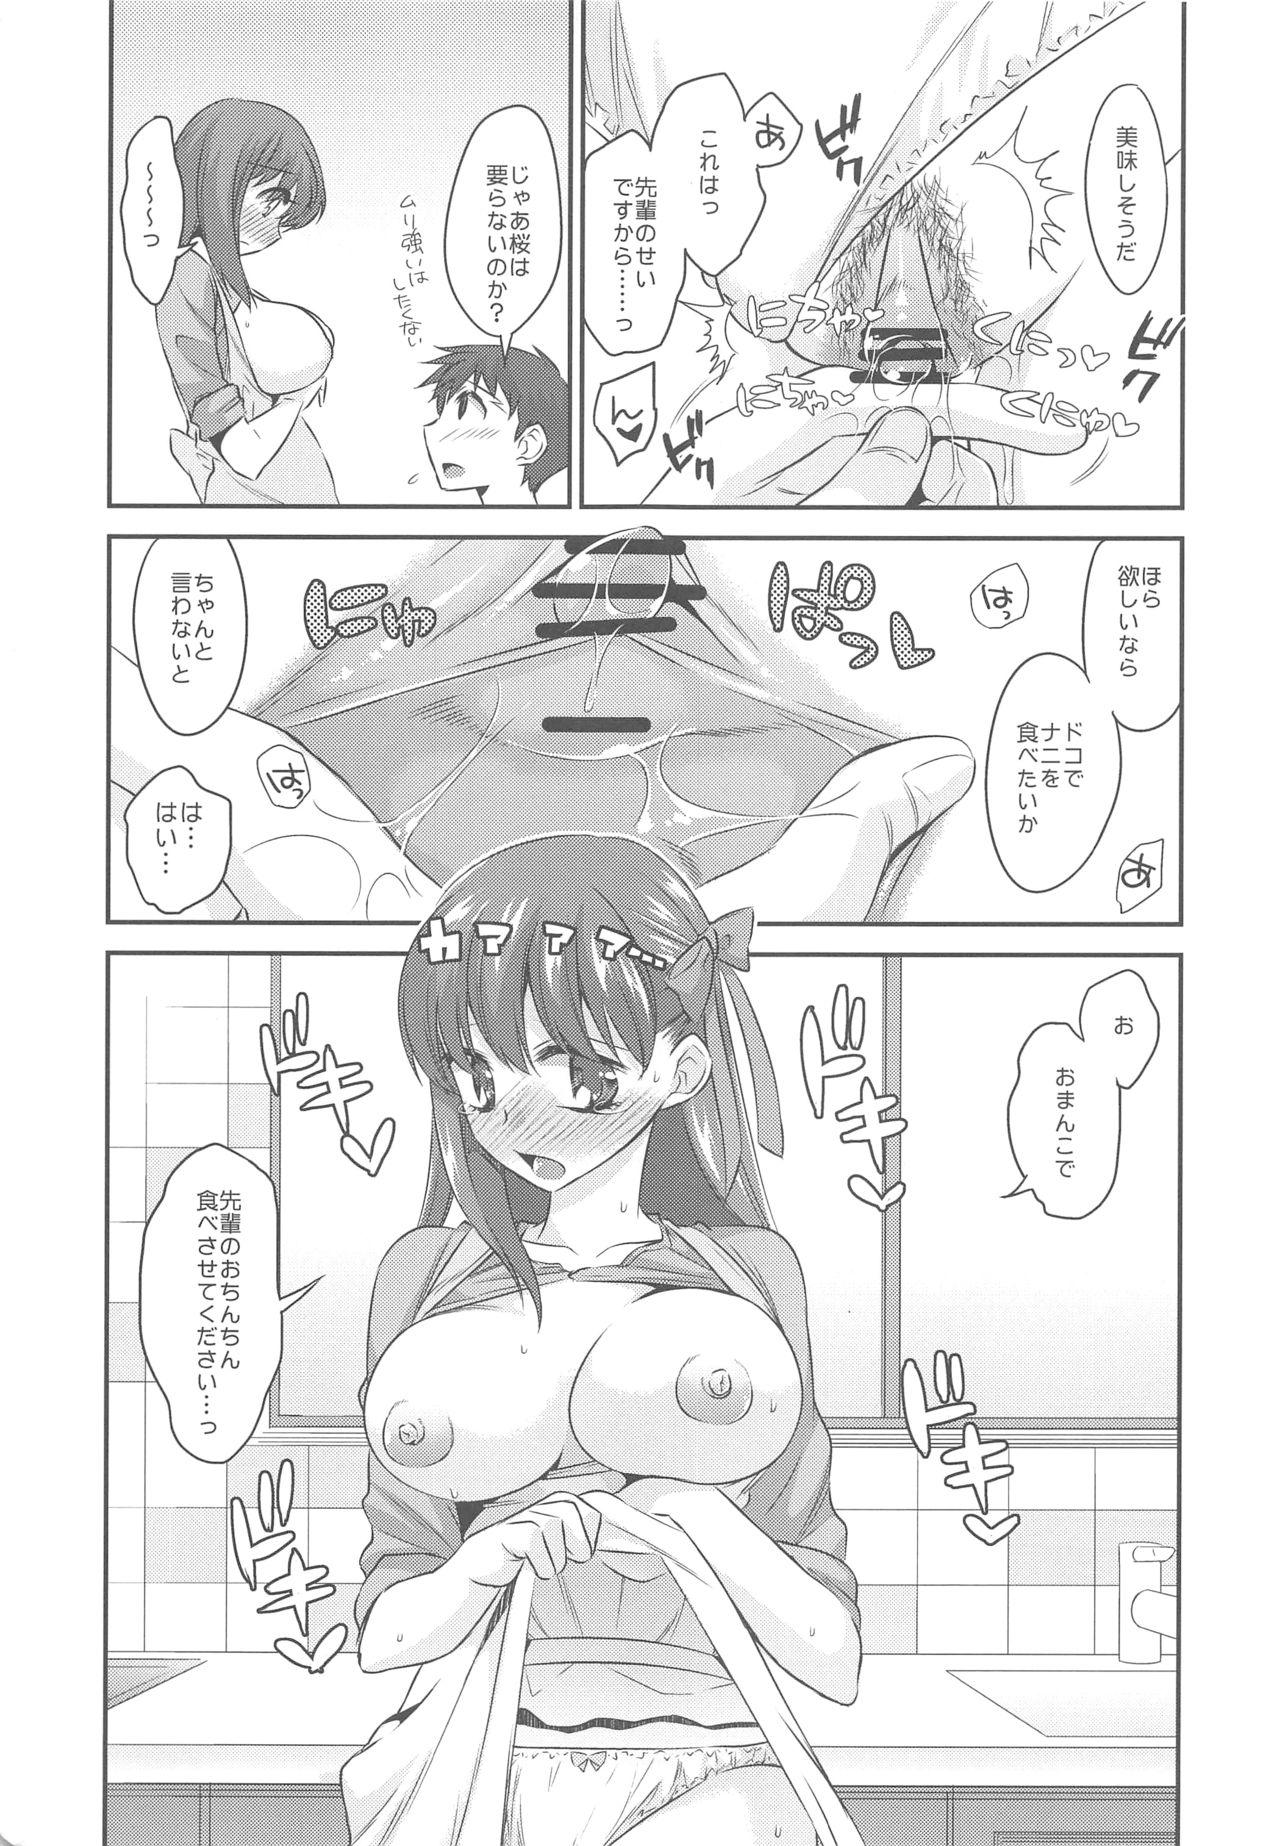 American Kitchen H - Fate stay night Big Boobs - Page 11